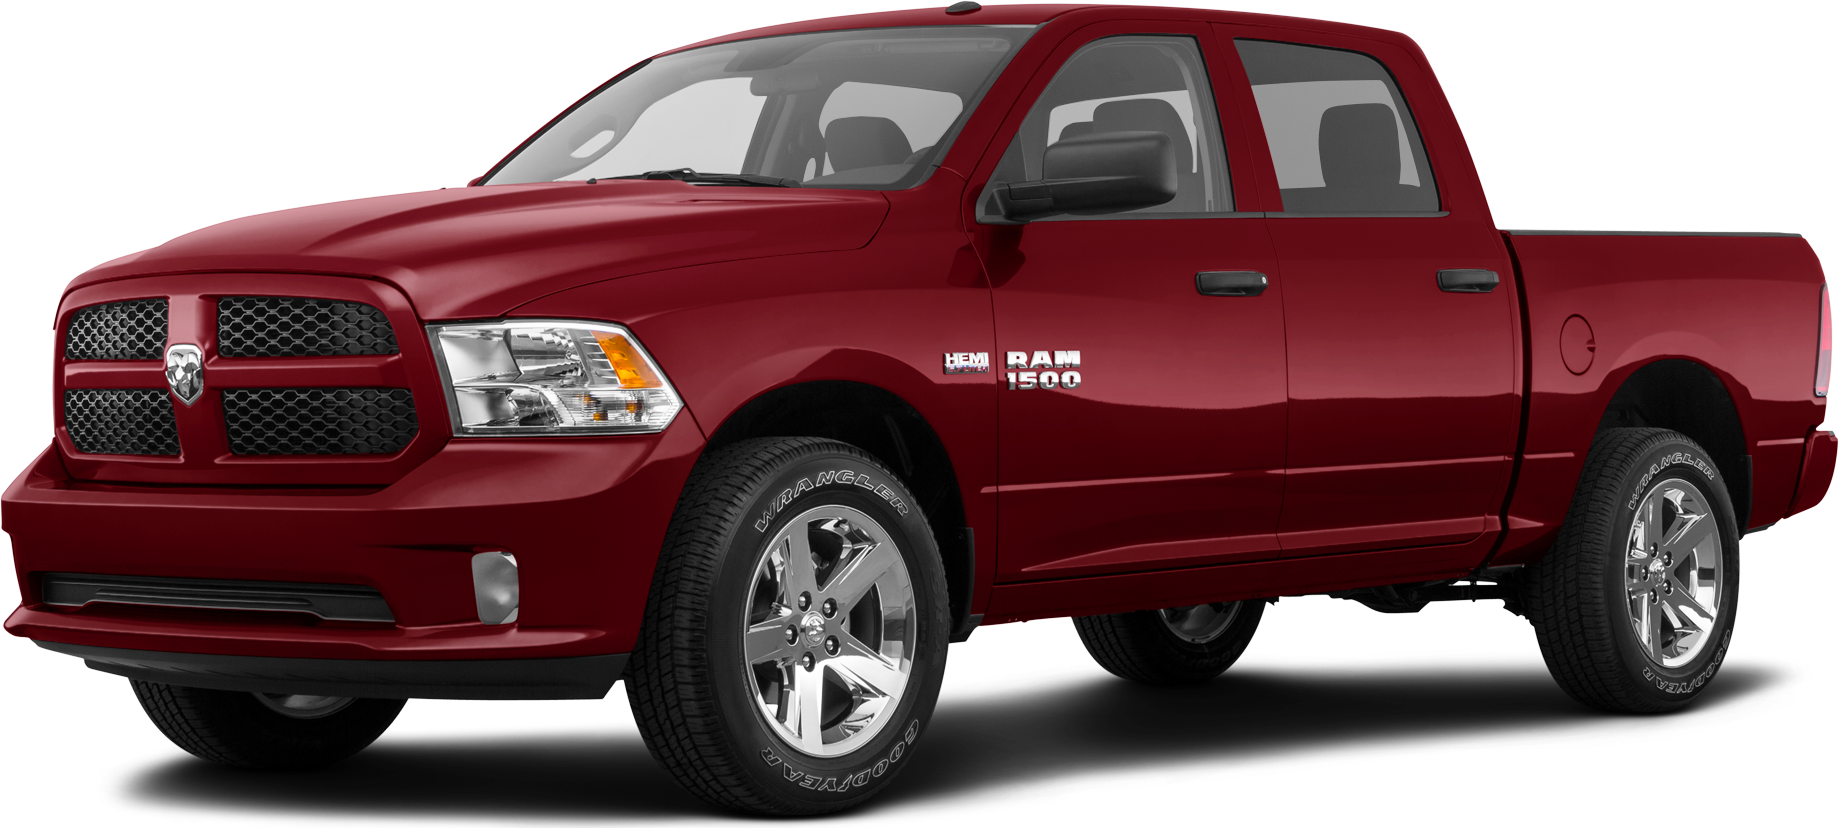 2018 Ram 1500 Crew Cab Values Cars for Sale | Kelley Book